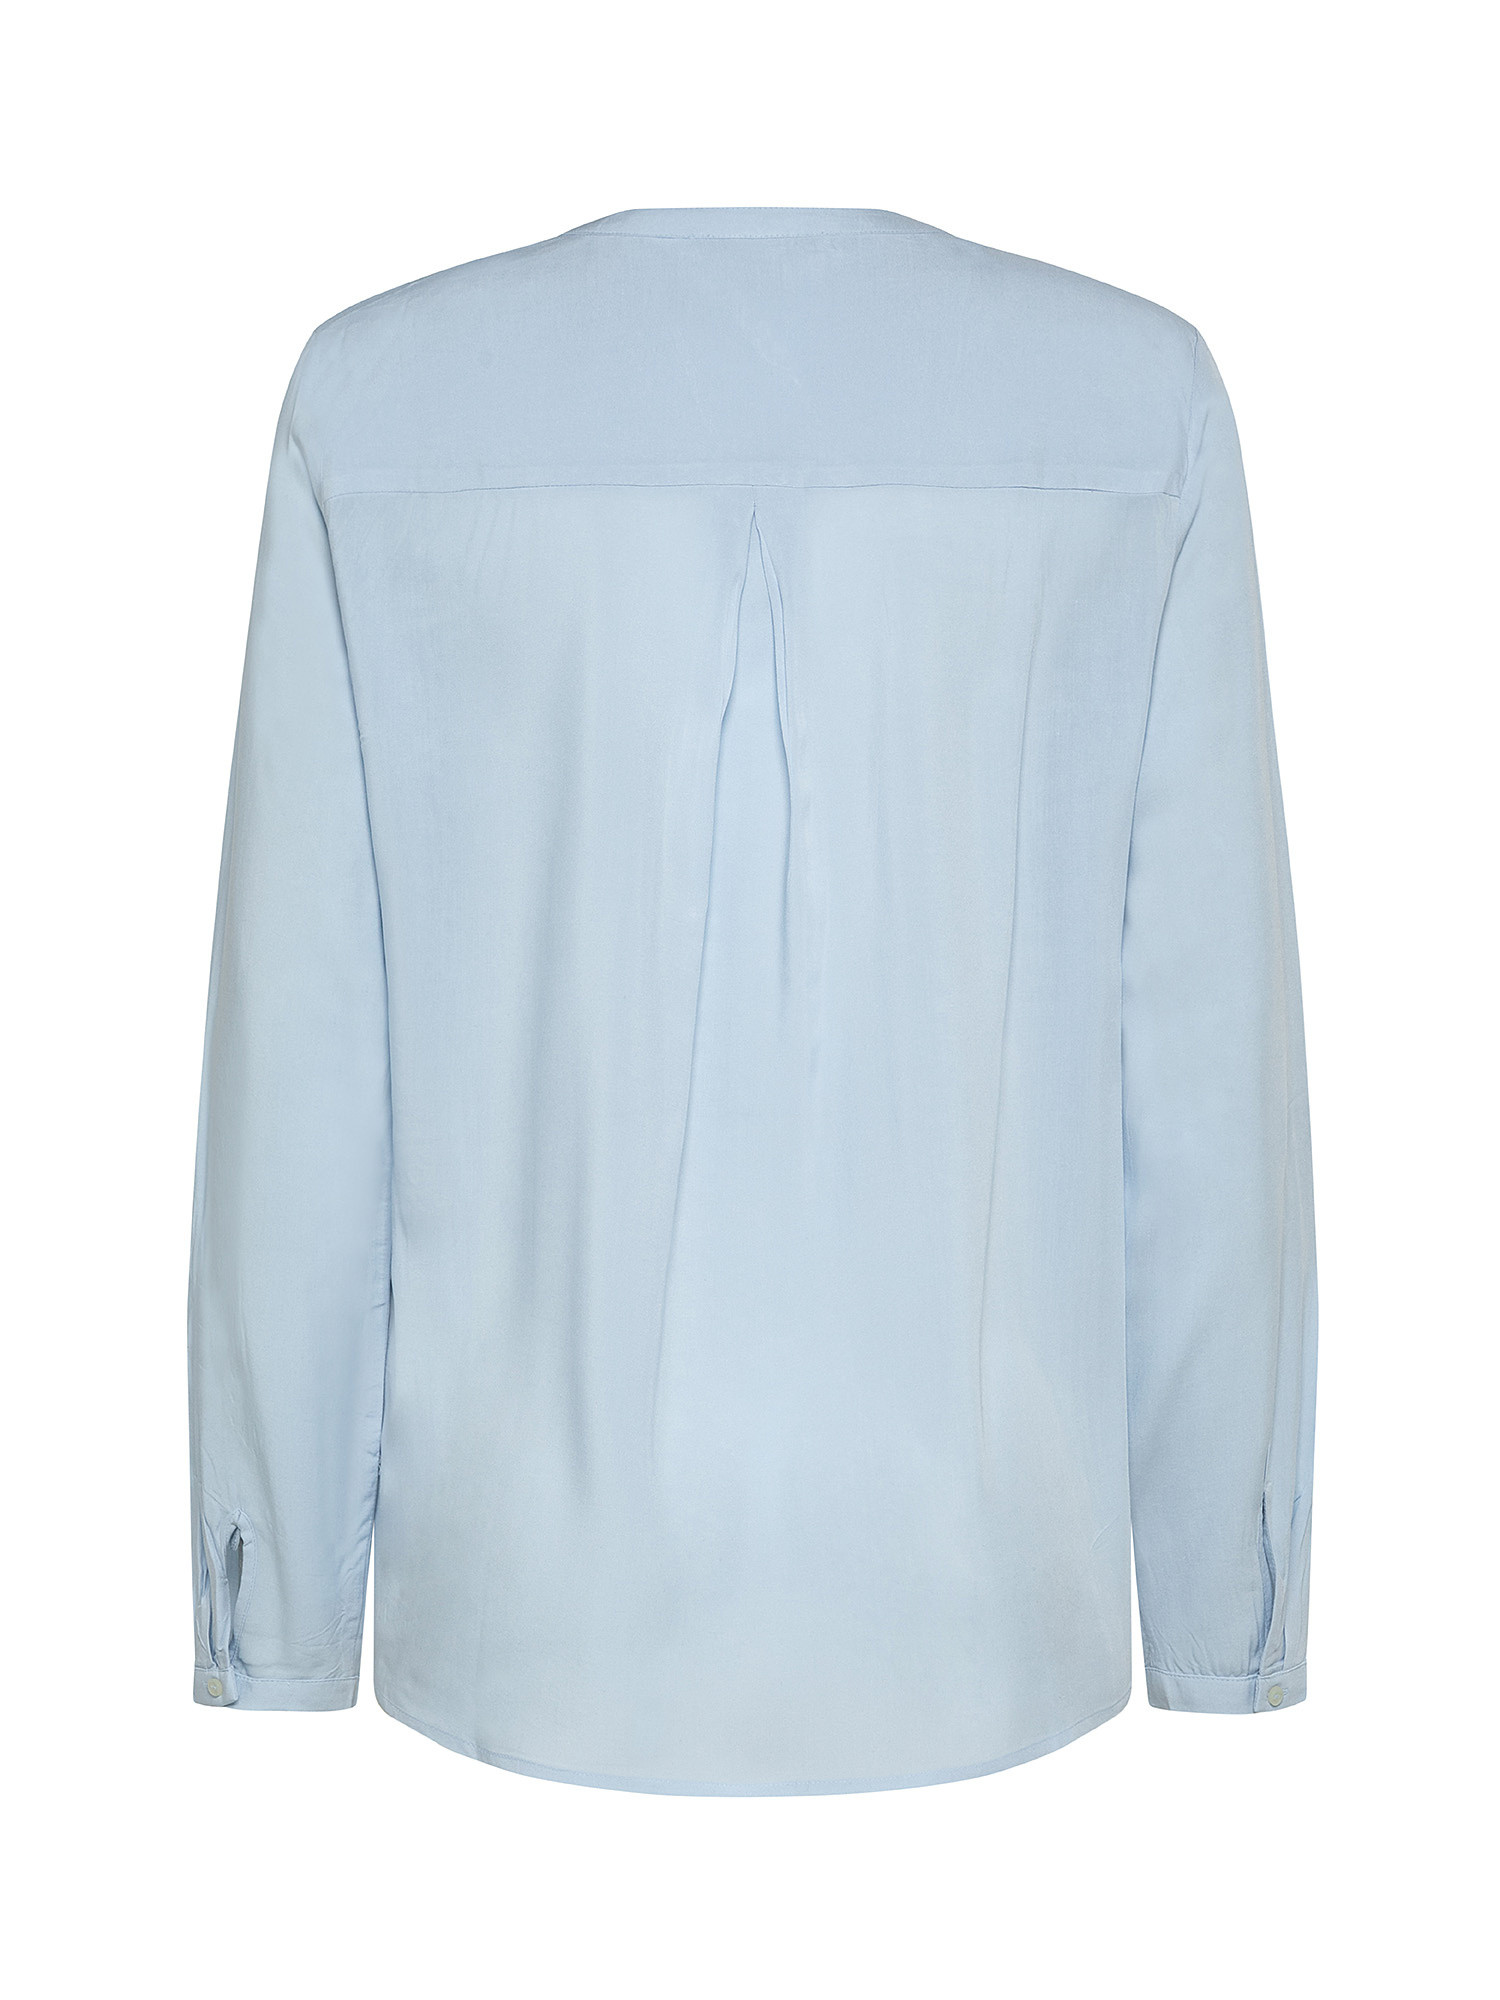 Blouse with adjustable sleeves, Light Blue, large image number 1